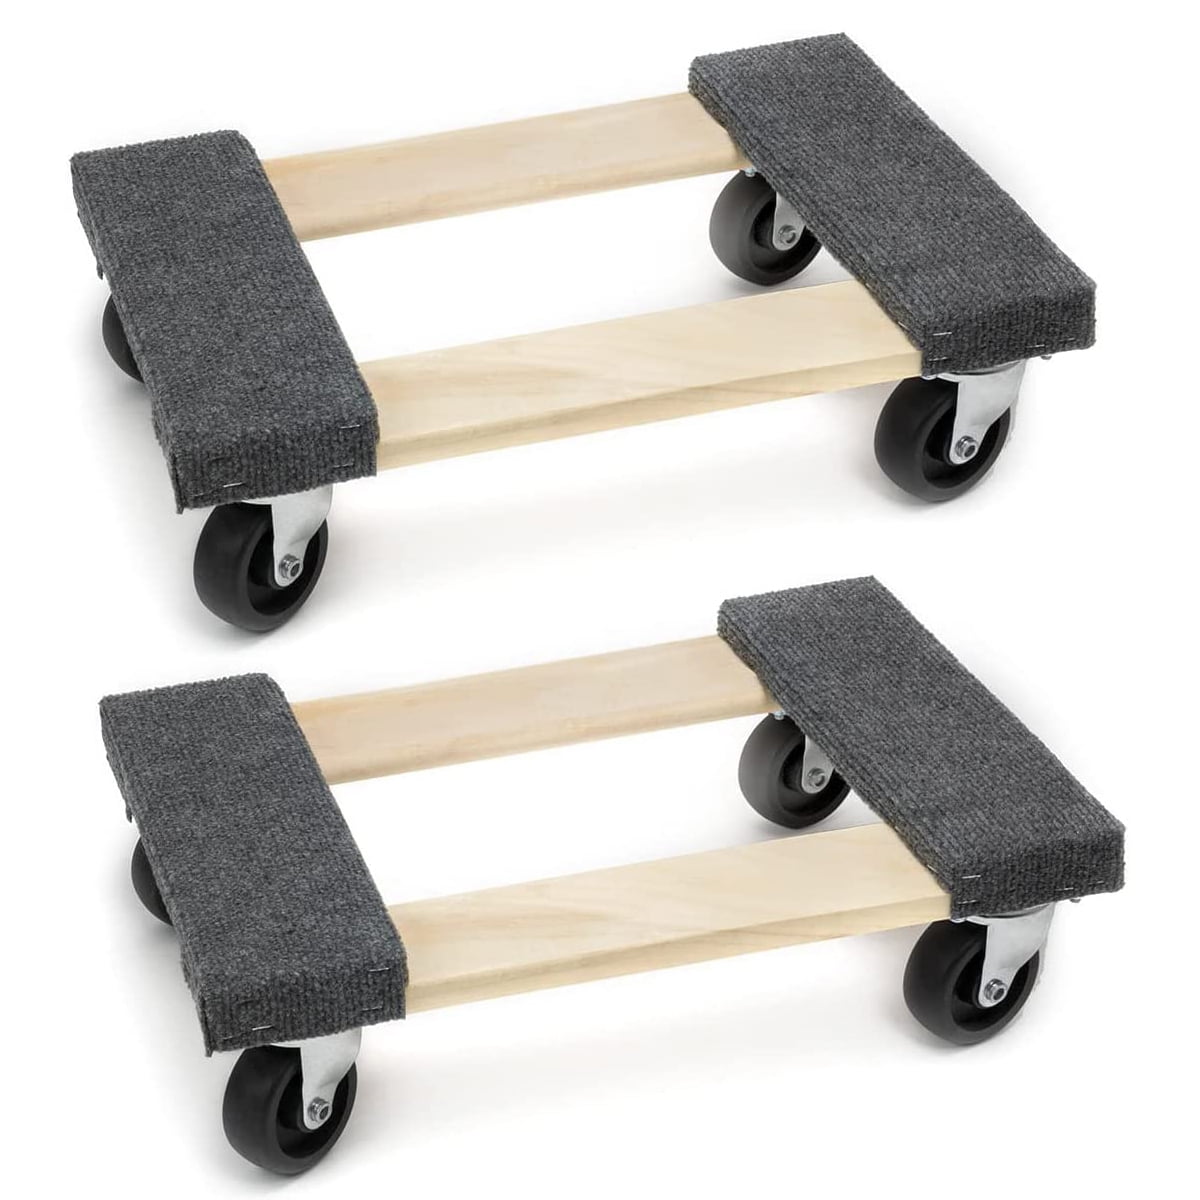 STARK USA 2Pcs 18 x 12 in Hardwood Moving Dolly Swivel Casters Mover  Dollies 1000 lbs Capacity